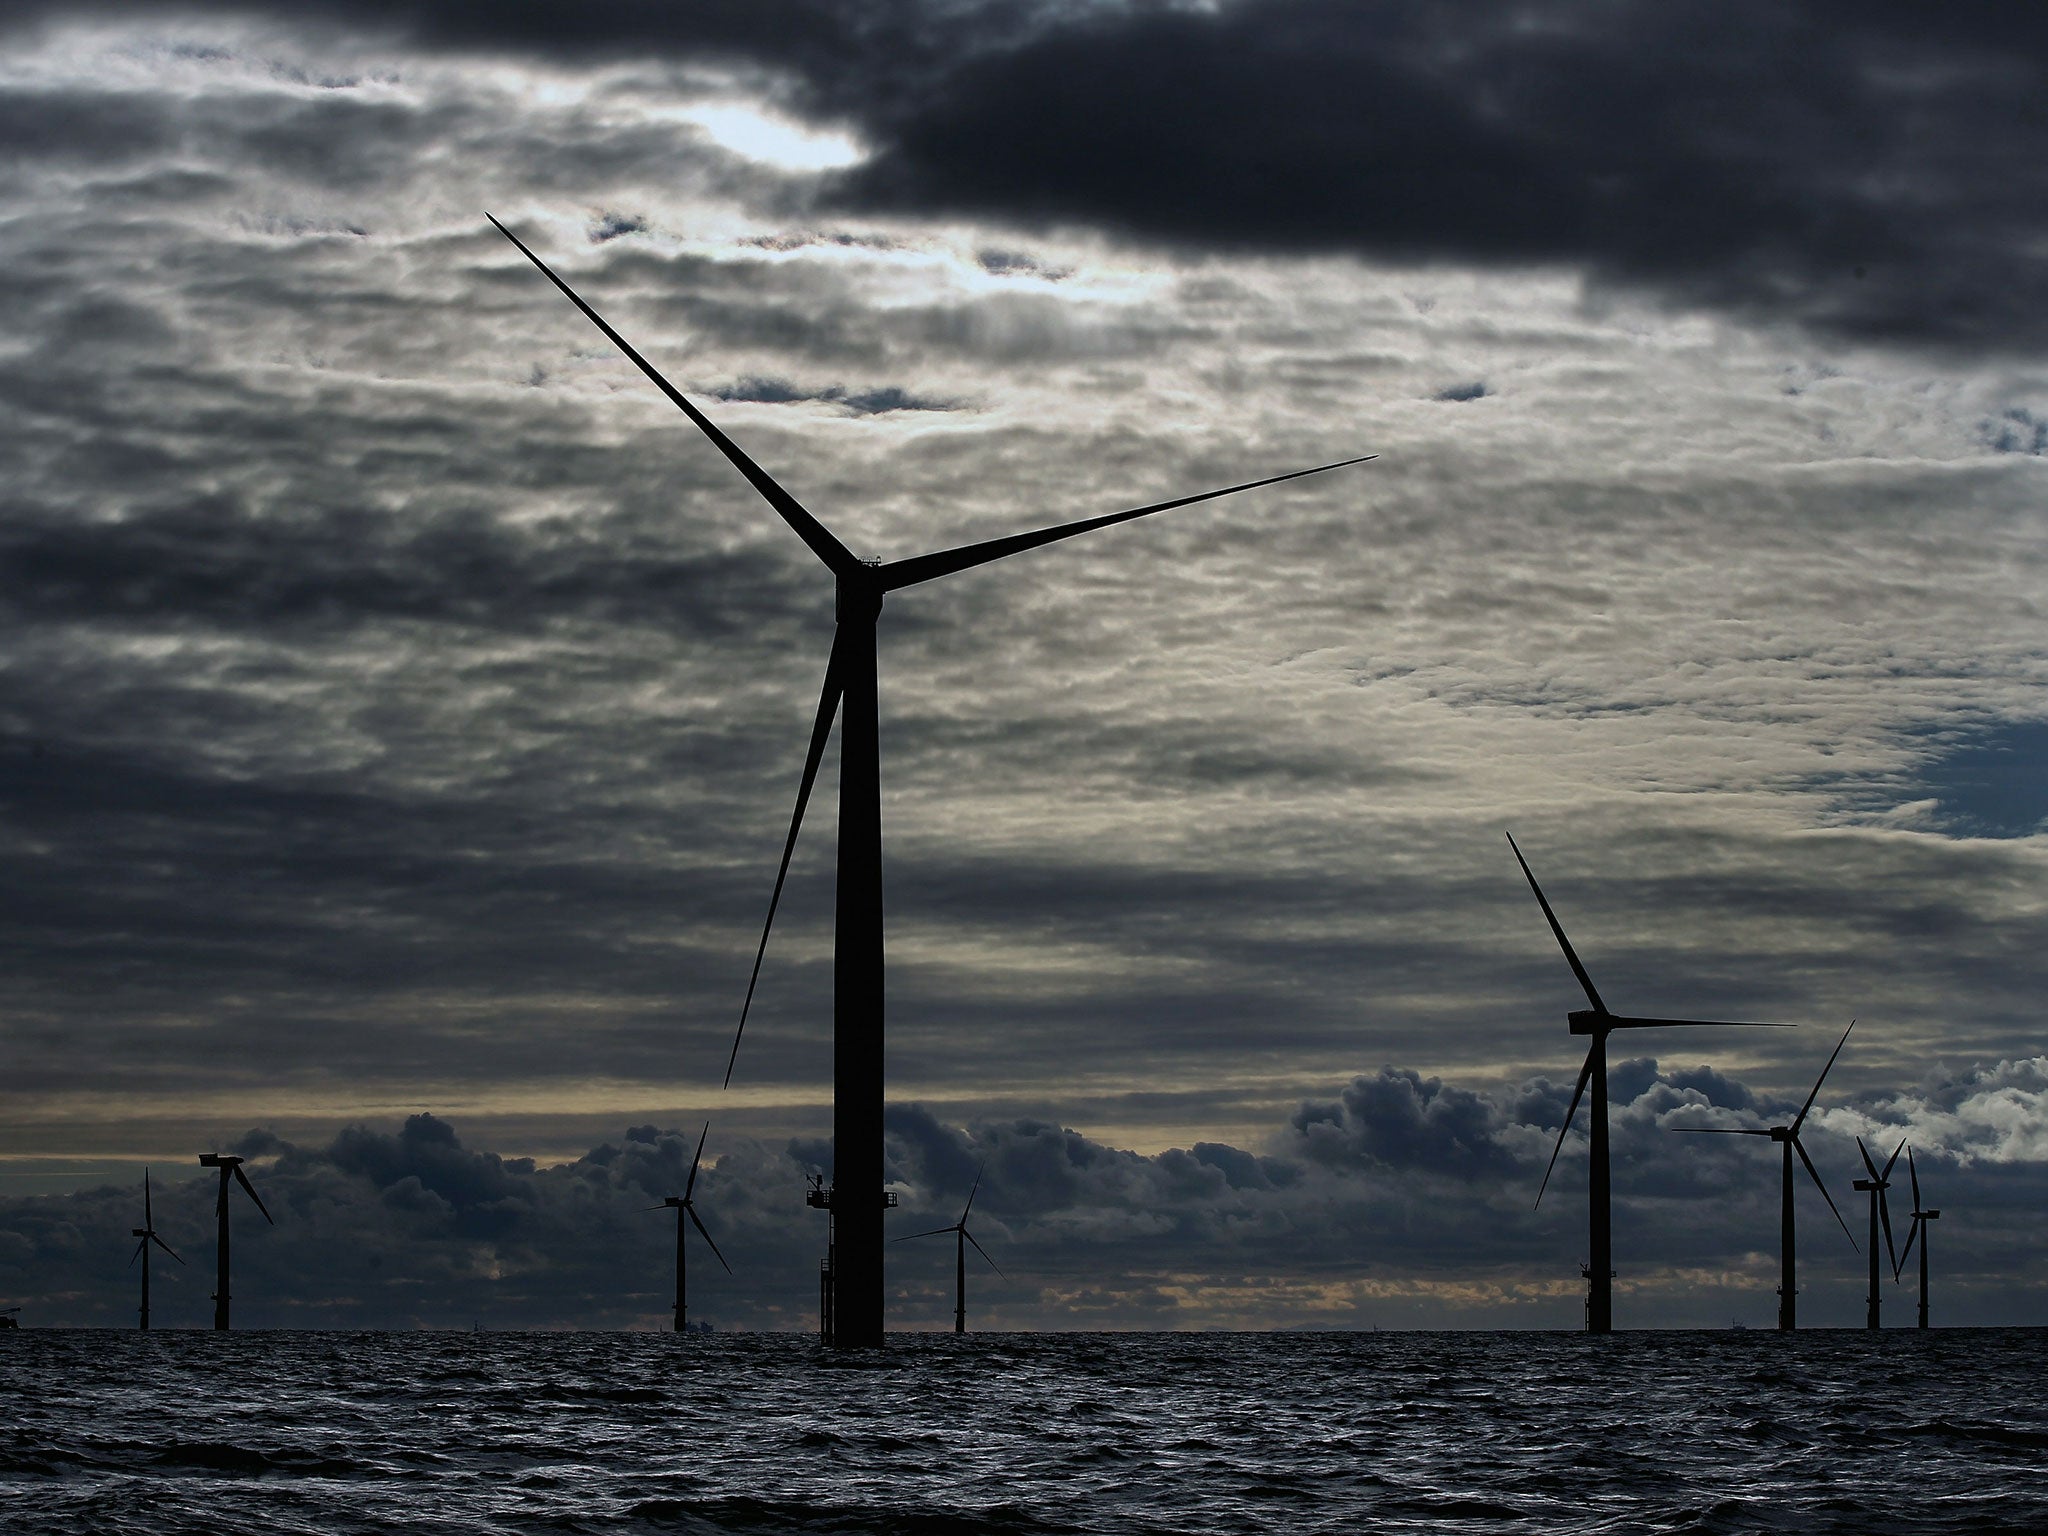 The turbines attract mussels and barnacles at their bases – which in turn attract predators